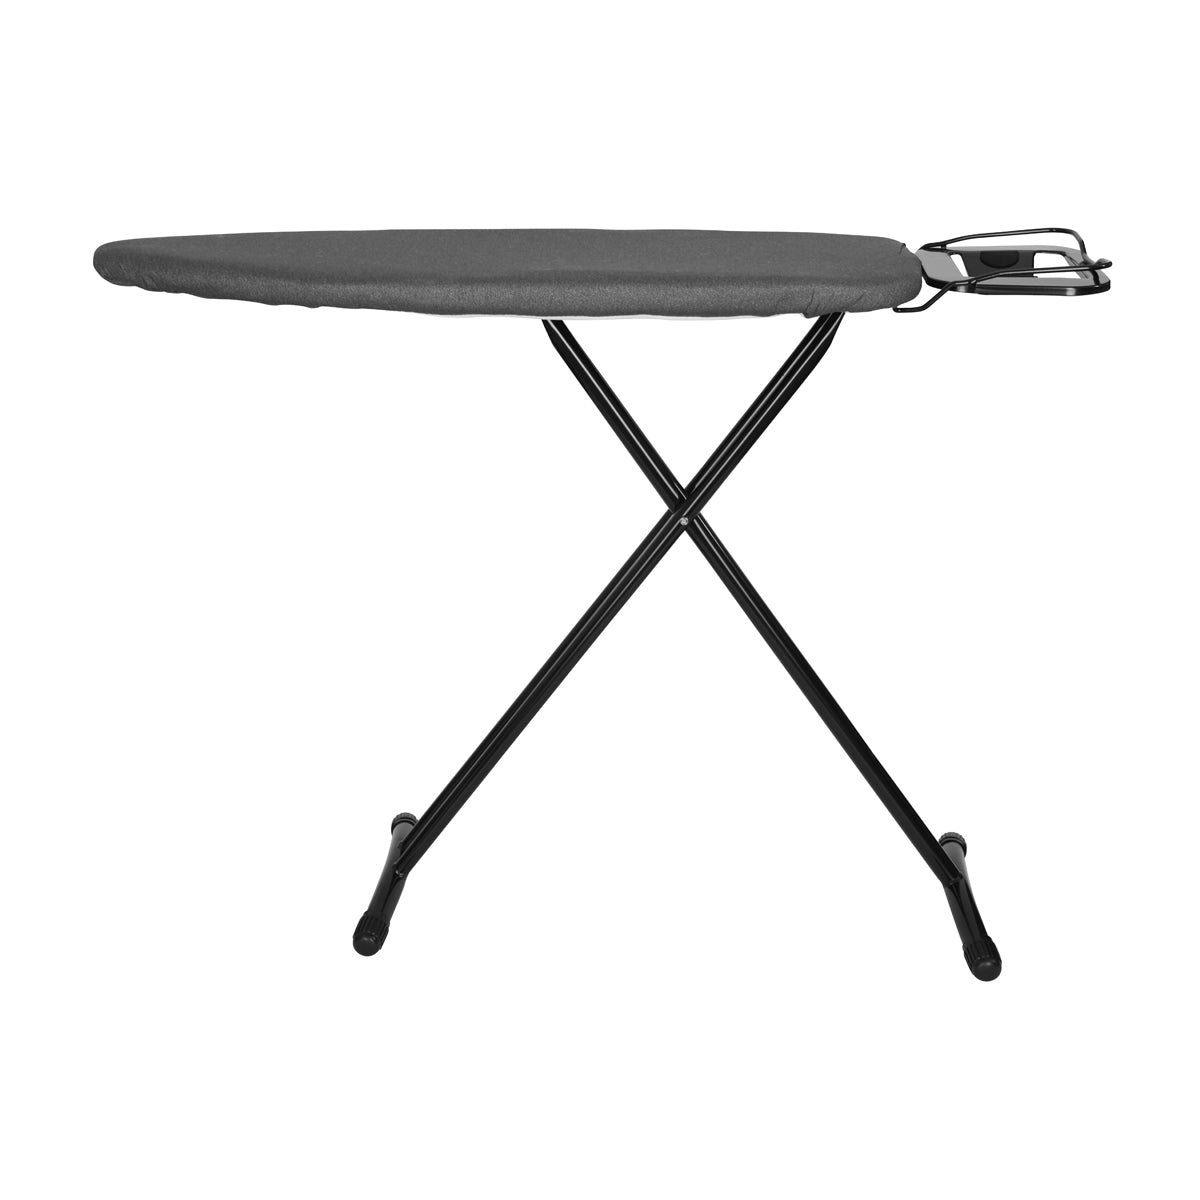 9000-19 Noble & Price Ironing Board with Iron Rest 915x320x830mm Tomkin Australia Hospitality Supplies